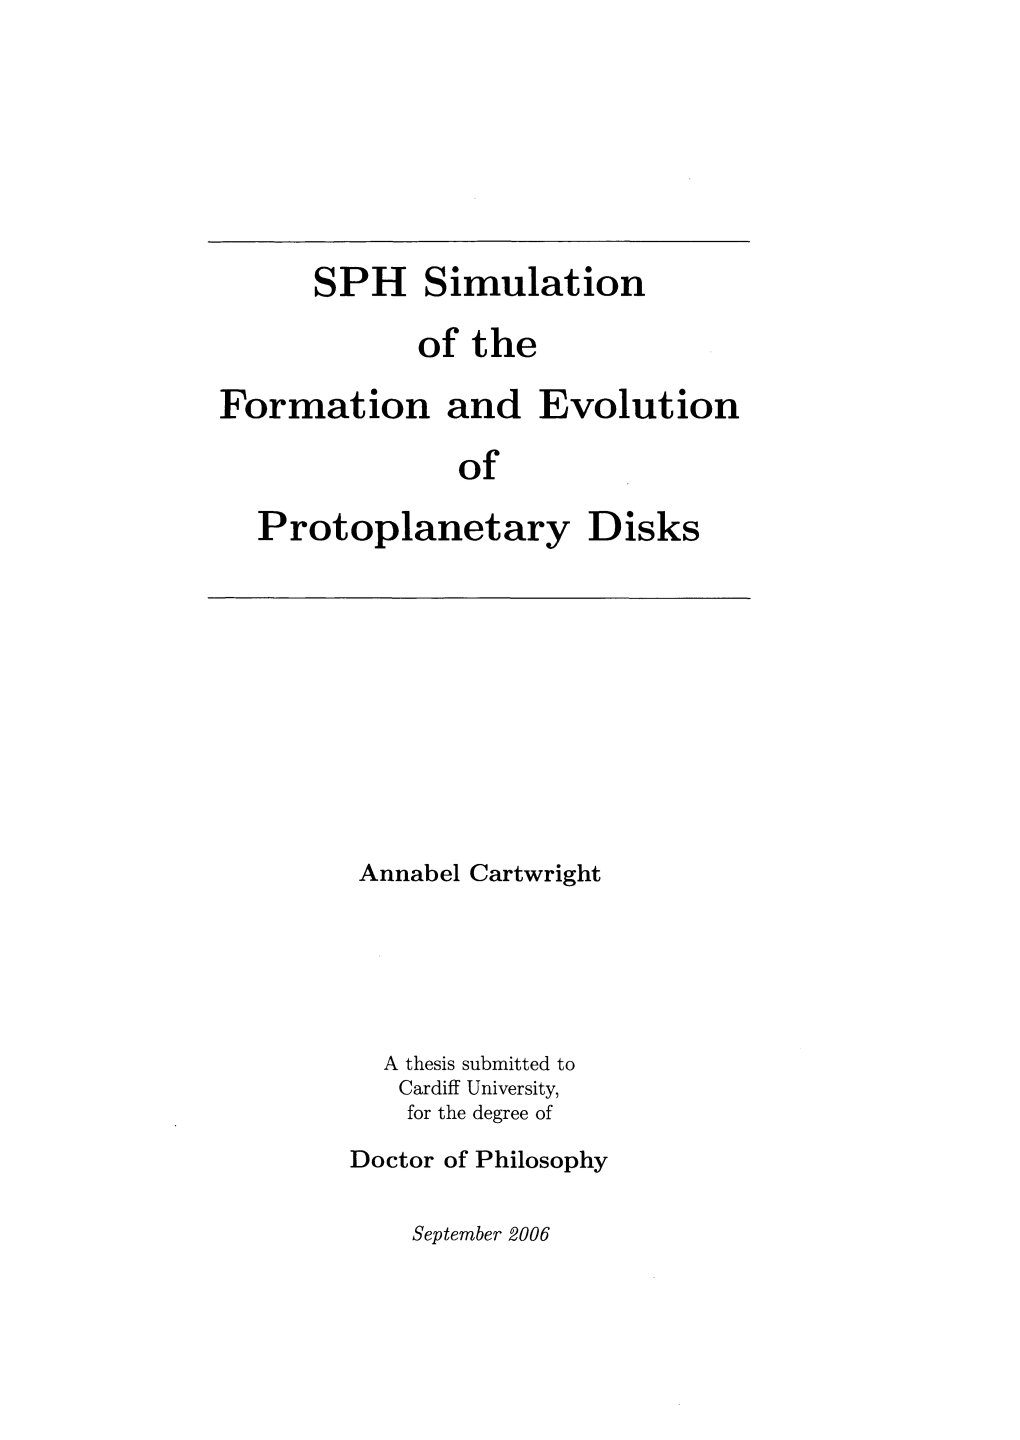 SPH Simulation of the Formation and Evolution of Protoplanetary Disks